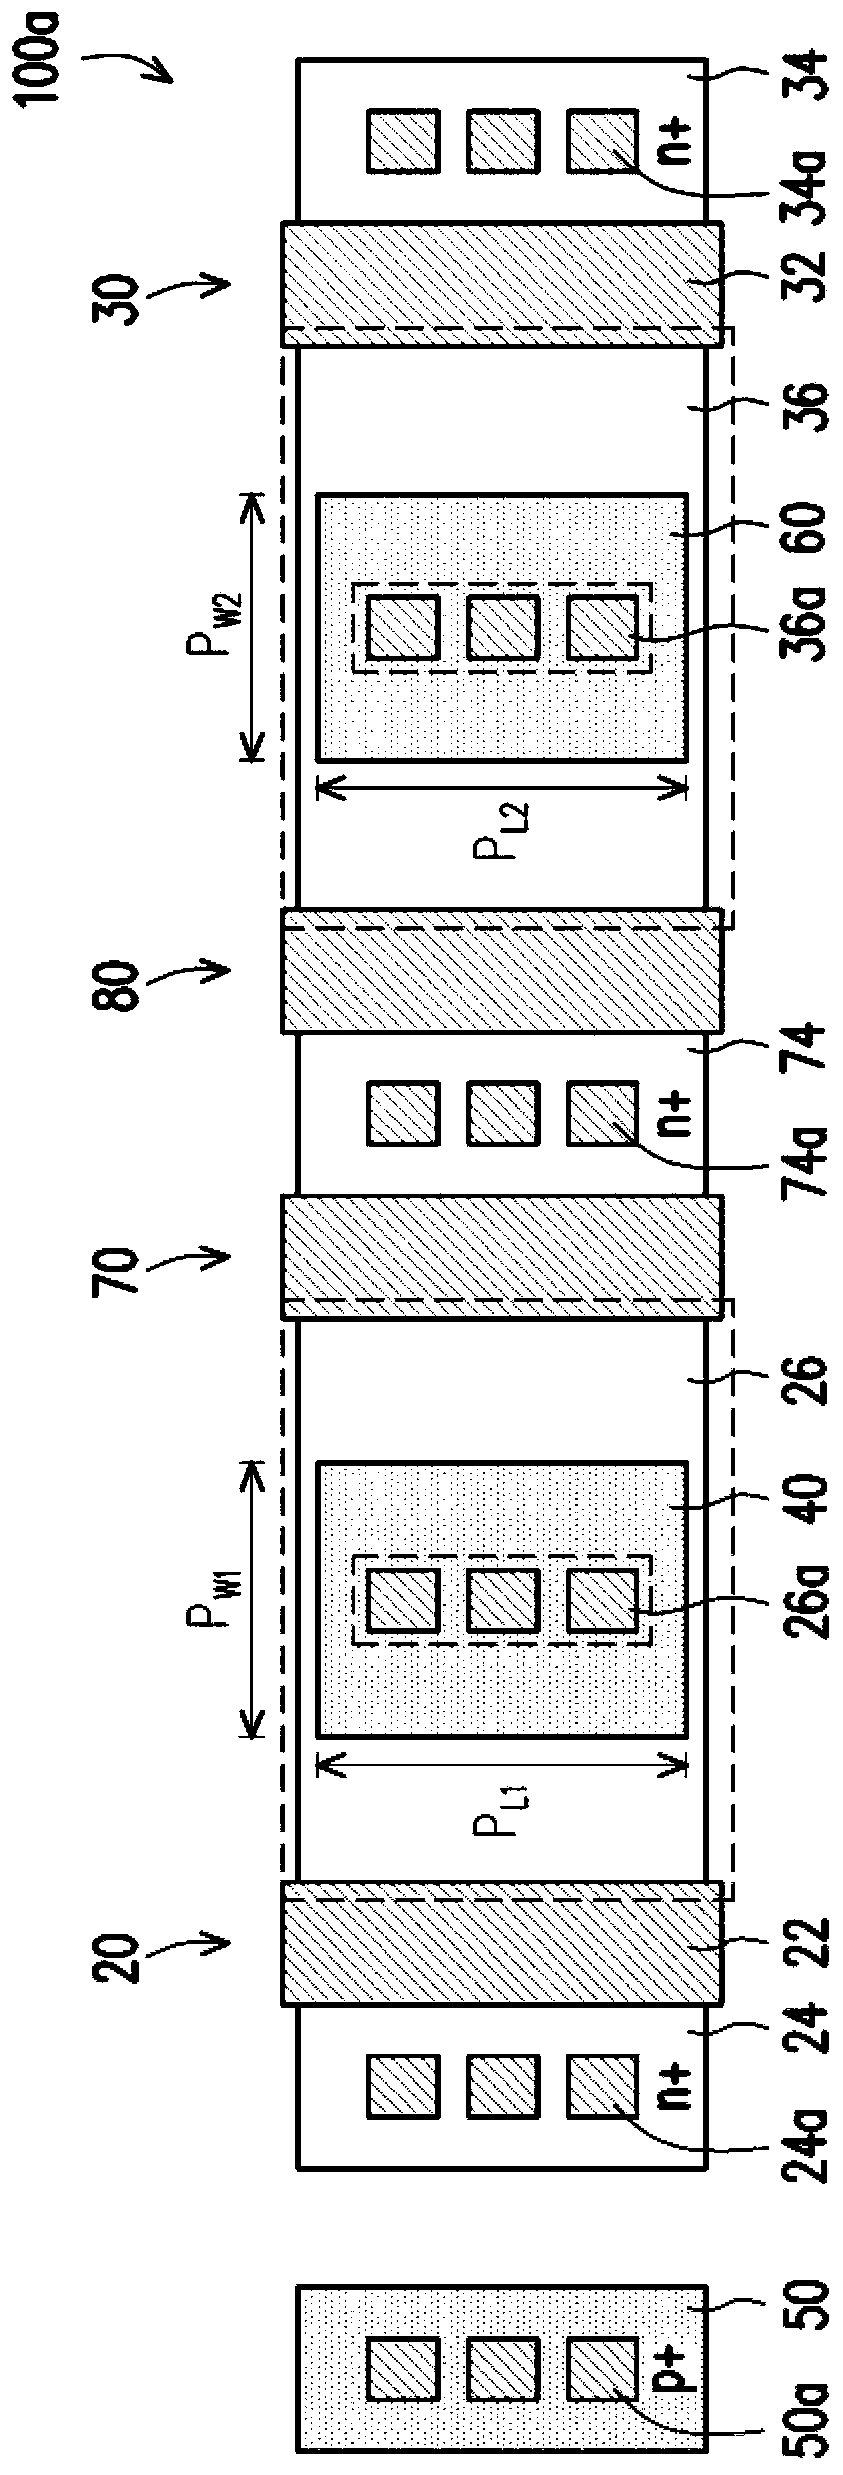 Electrostatic Discharge Protection Structure